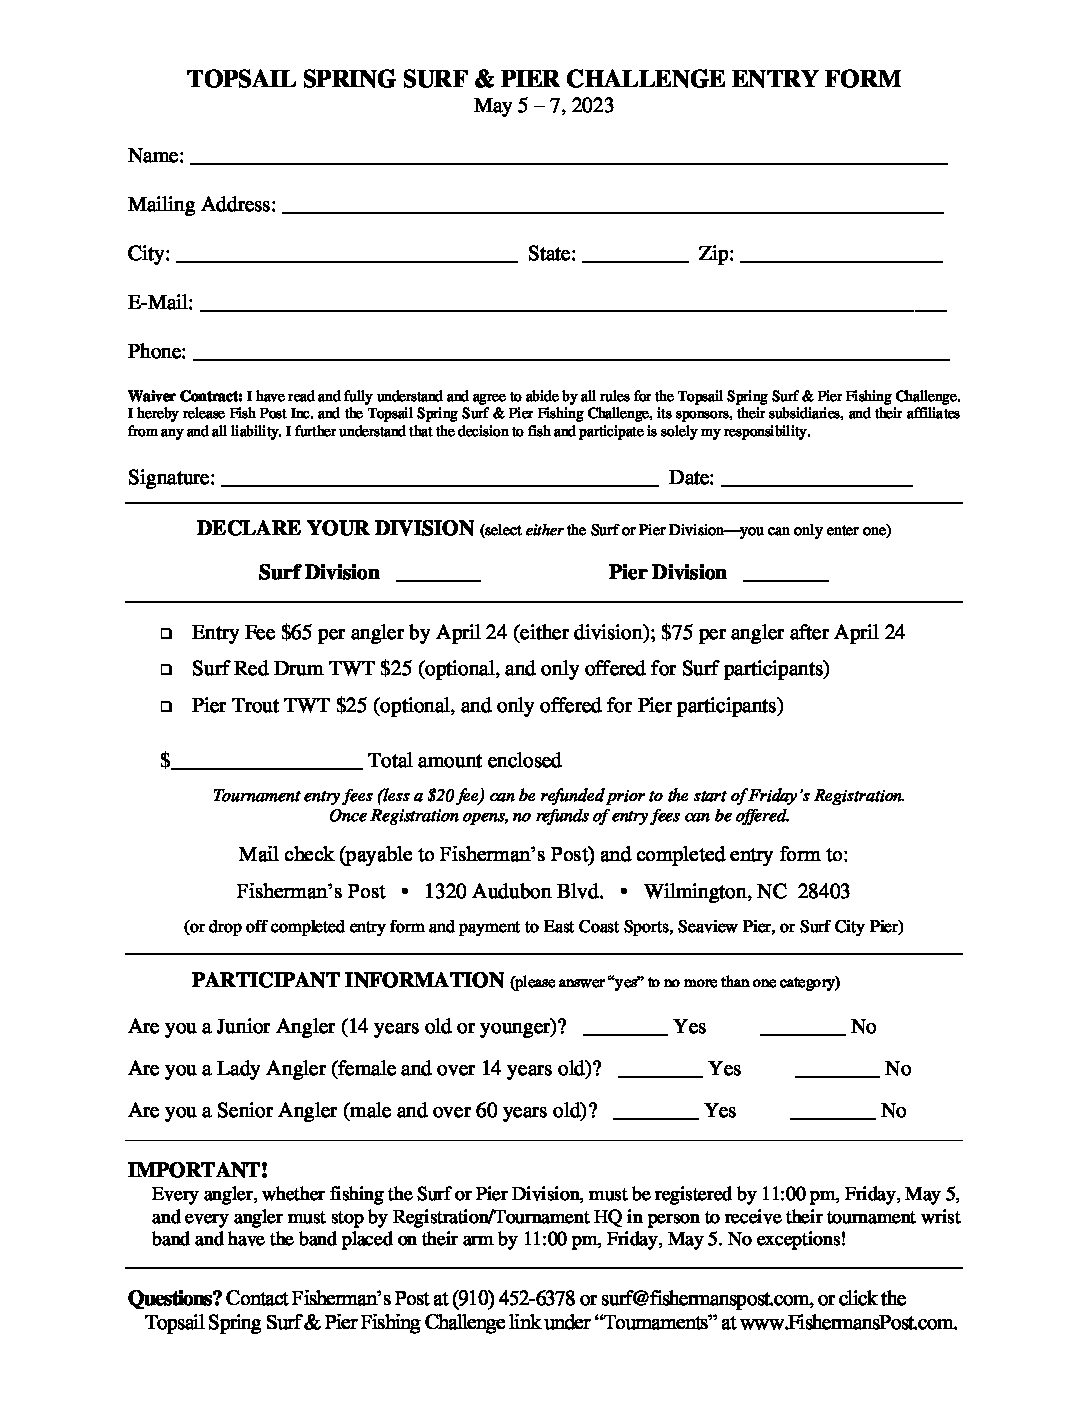 2023 Topsail Spring Surf & Pier Fishing Challenge Print Entry Form